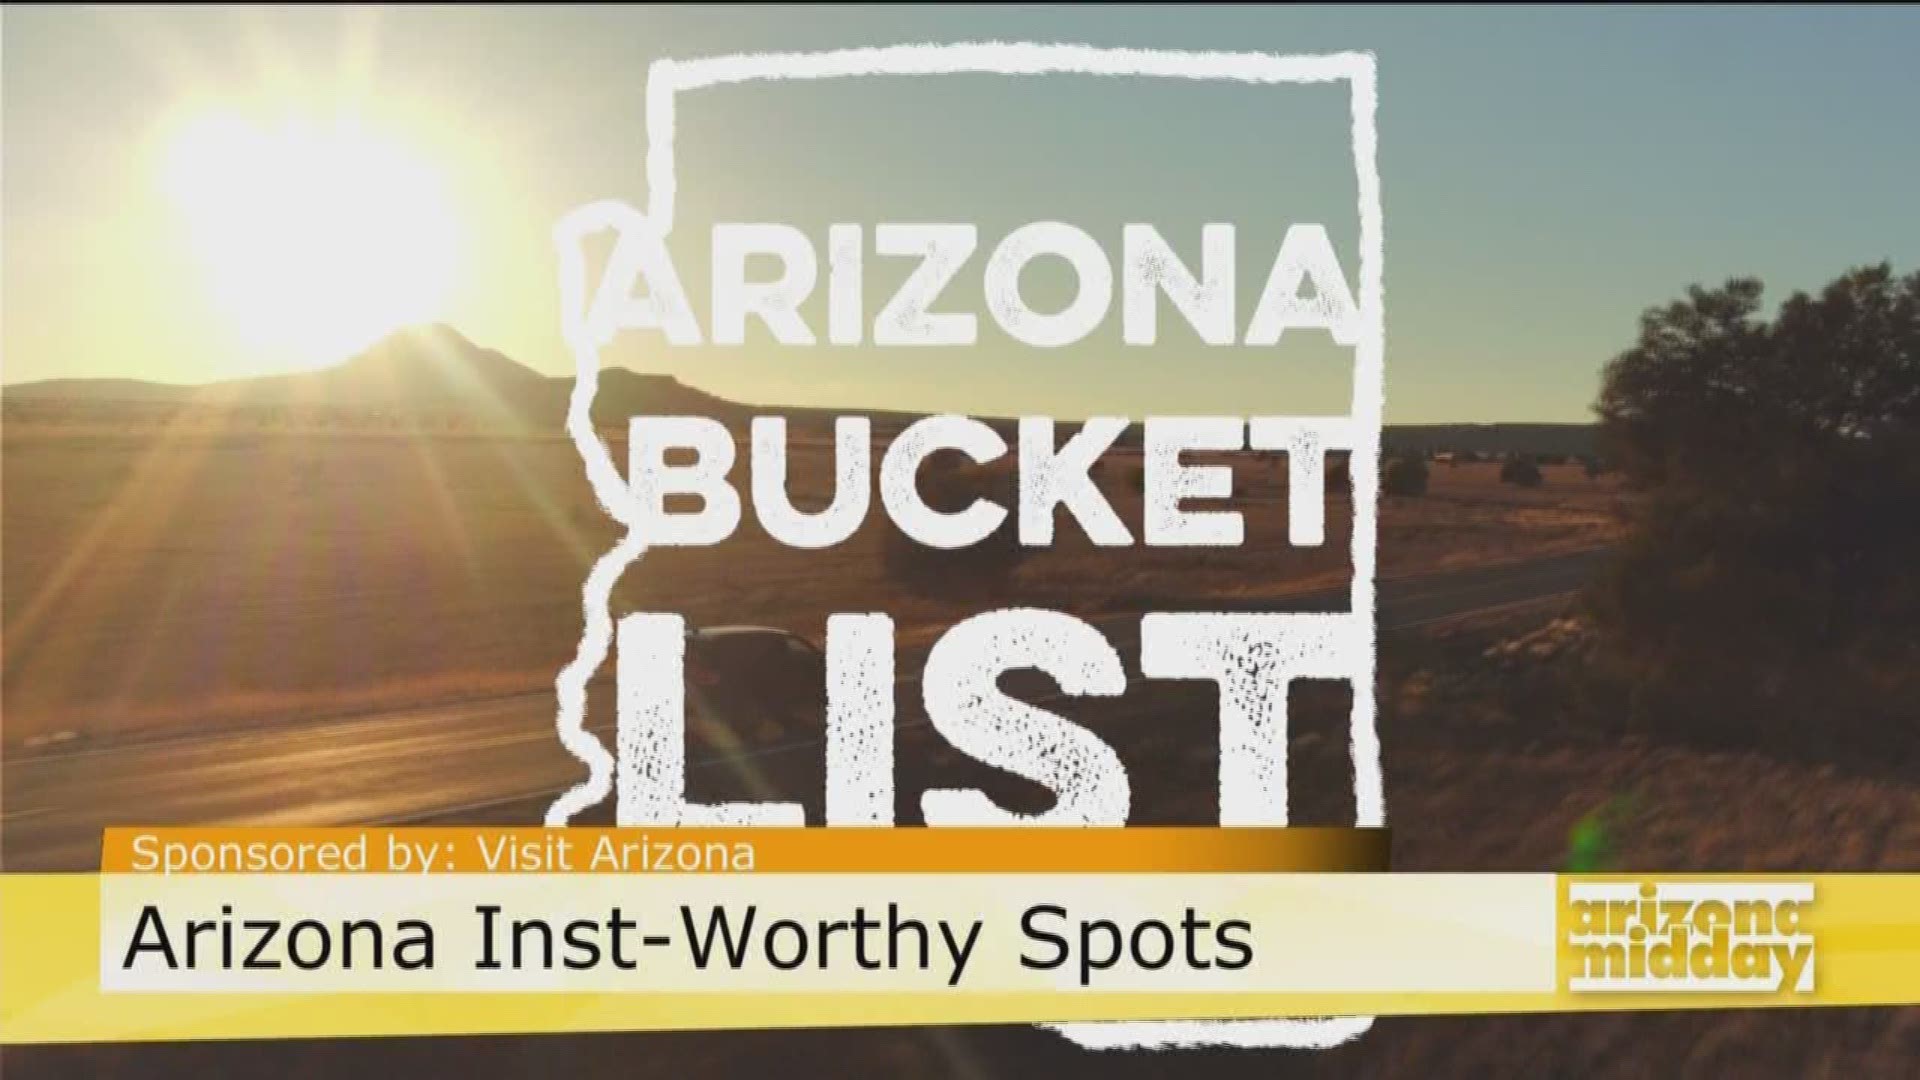 From the Grand Canyon to Saguaro National Park, Arizona Office of Tourism's Scott Dunn tells us about the best instagrammable spots in the state.